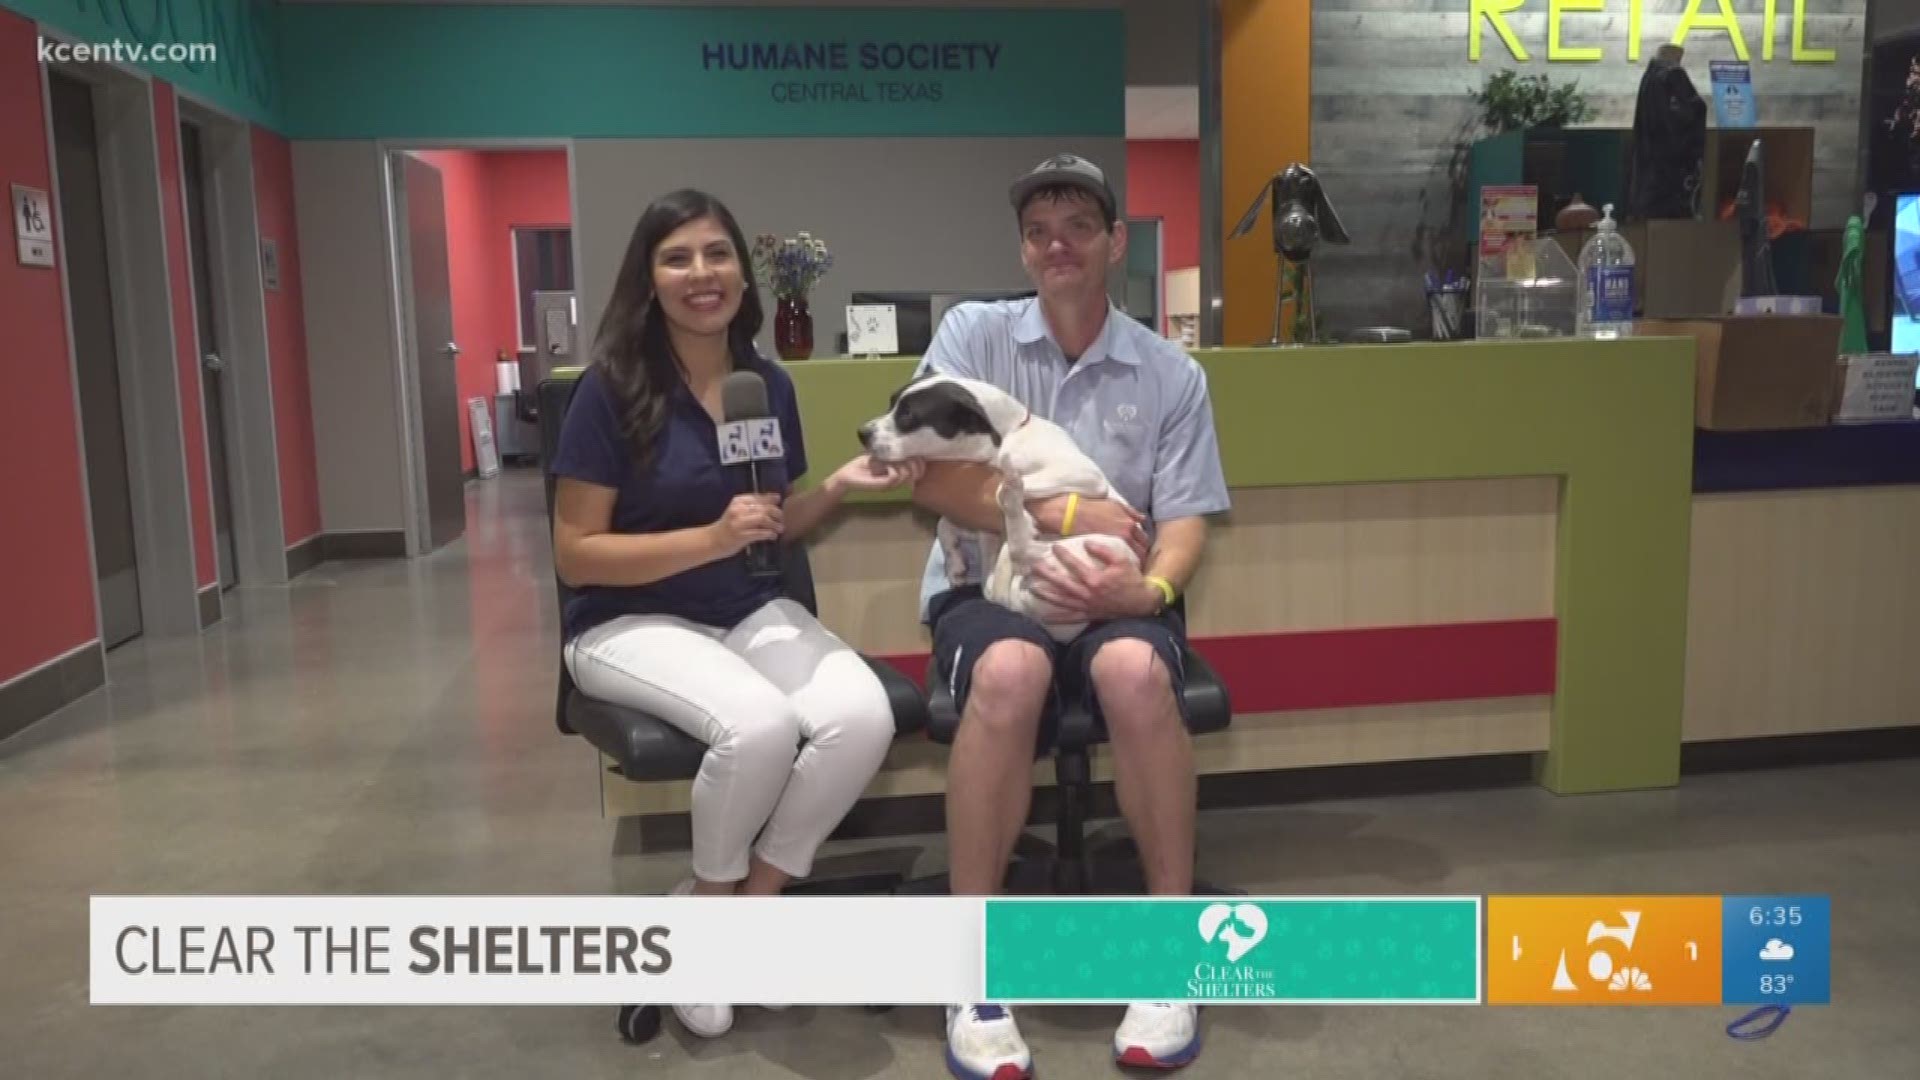 Clear the Shelters is back! The Humane Society of Central Texas is offering free pet adoptions Saturday.